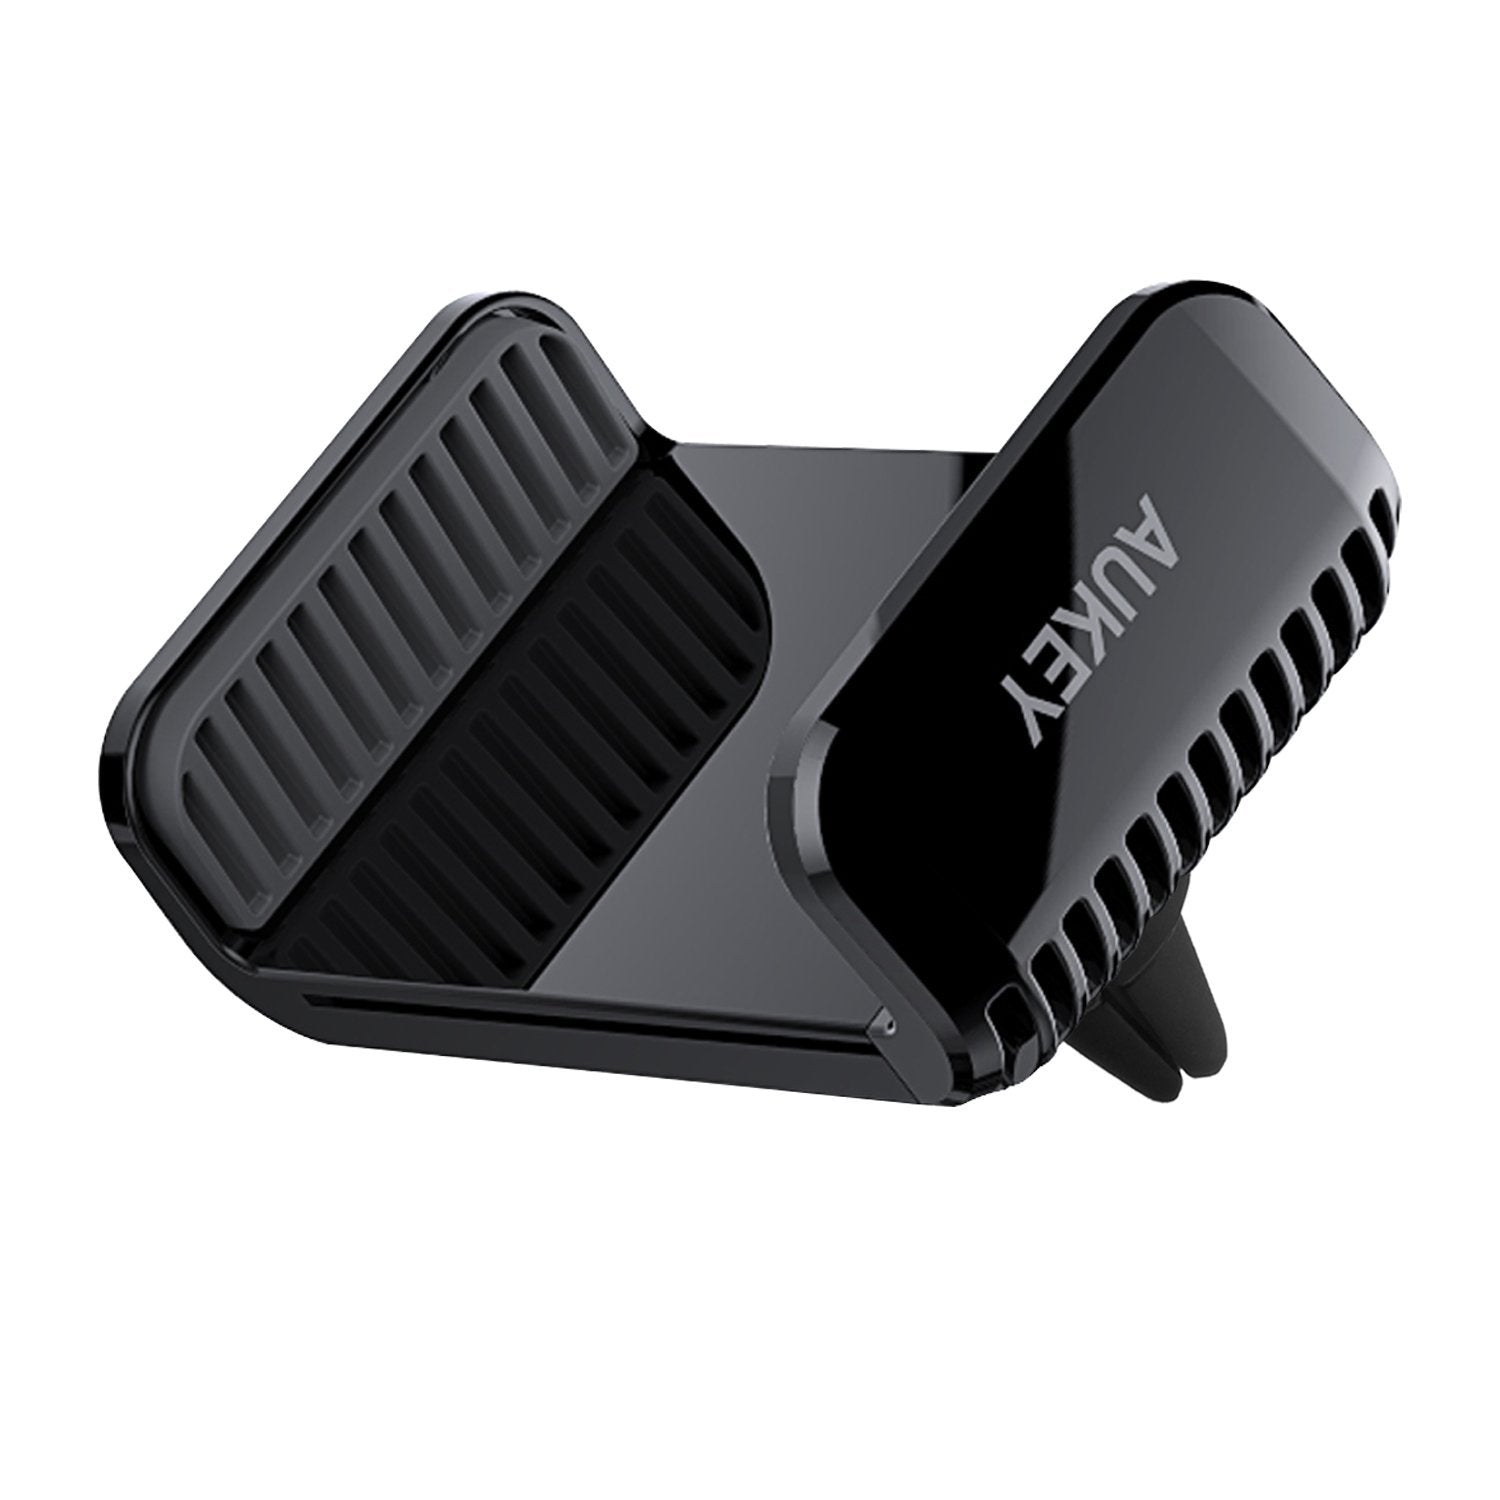 AUKEY HD-C7 Air Vent Mount Car Holder Cradle - Aukey Malaysia Official Store